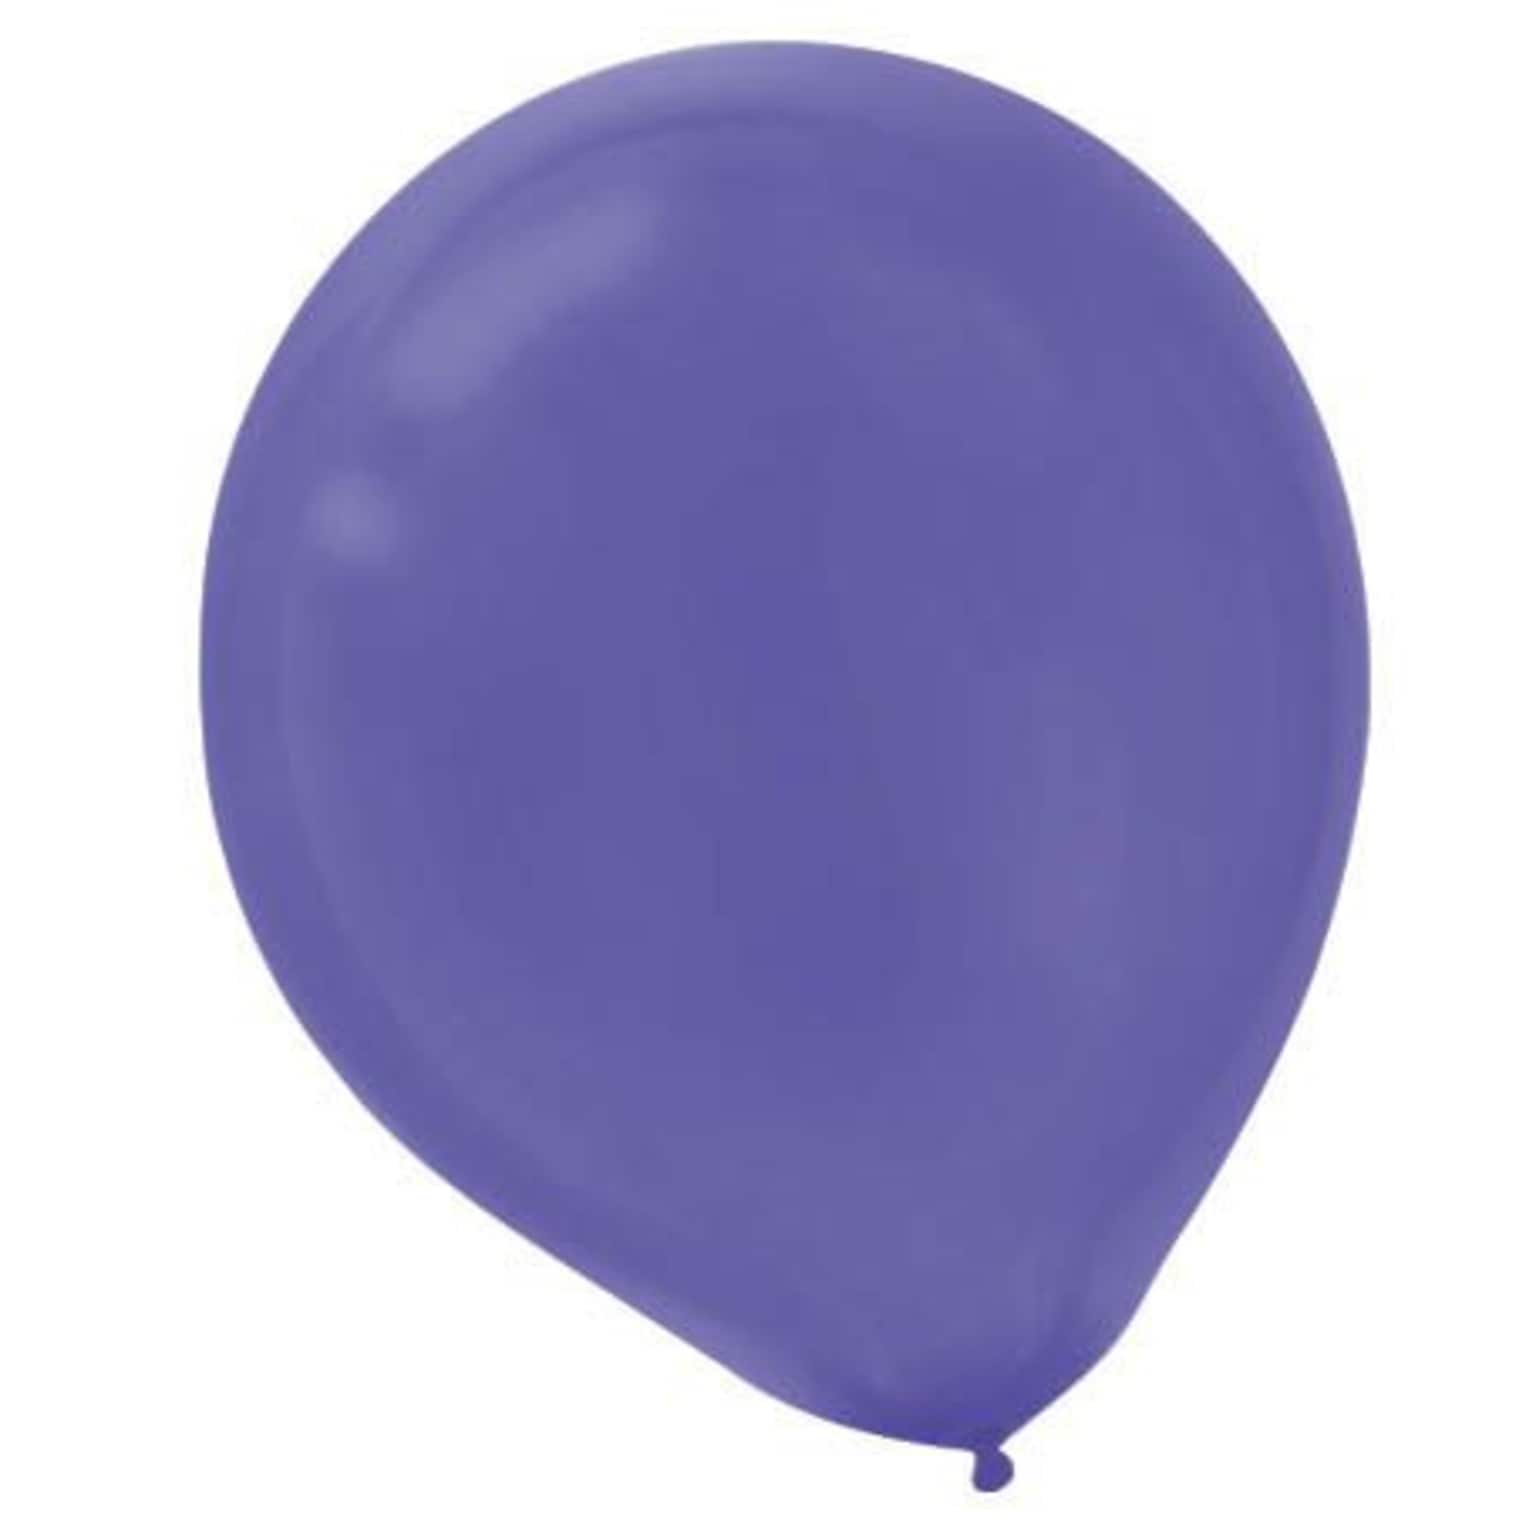 Amscan Solid Color Latex Balloons Packaged, 12, 18/Pack, New Purple, 15 Per Pack (113252.106)